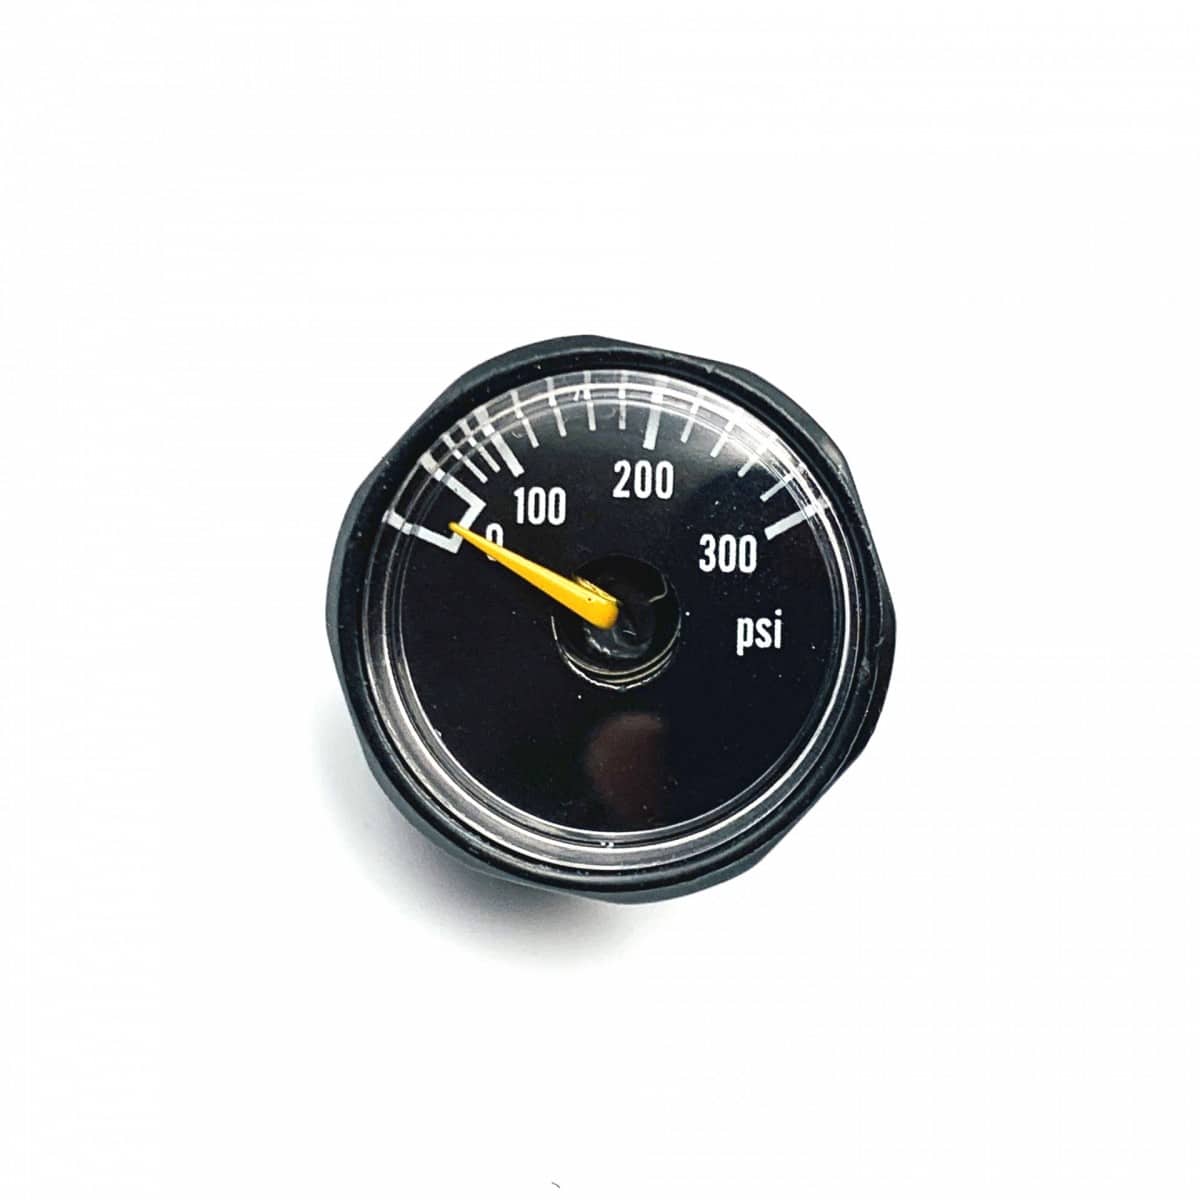 EPES 300 PSI Small pressure gauge - 1/8 NPT